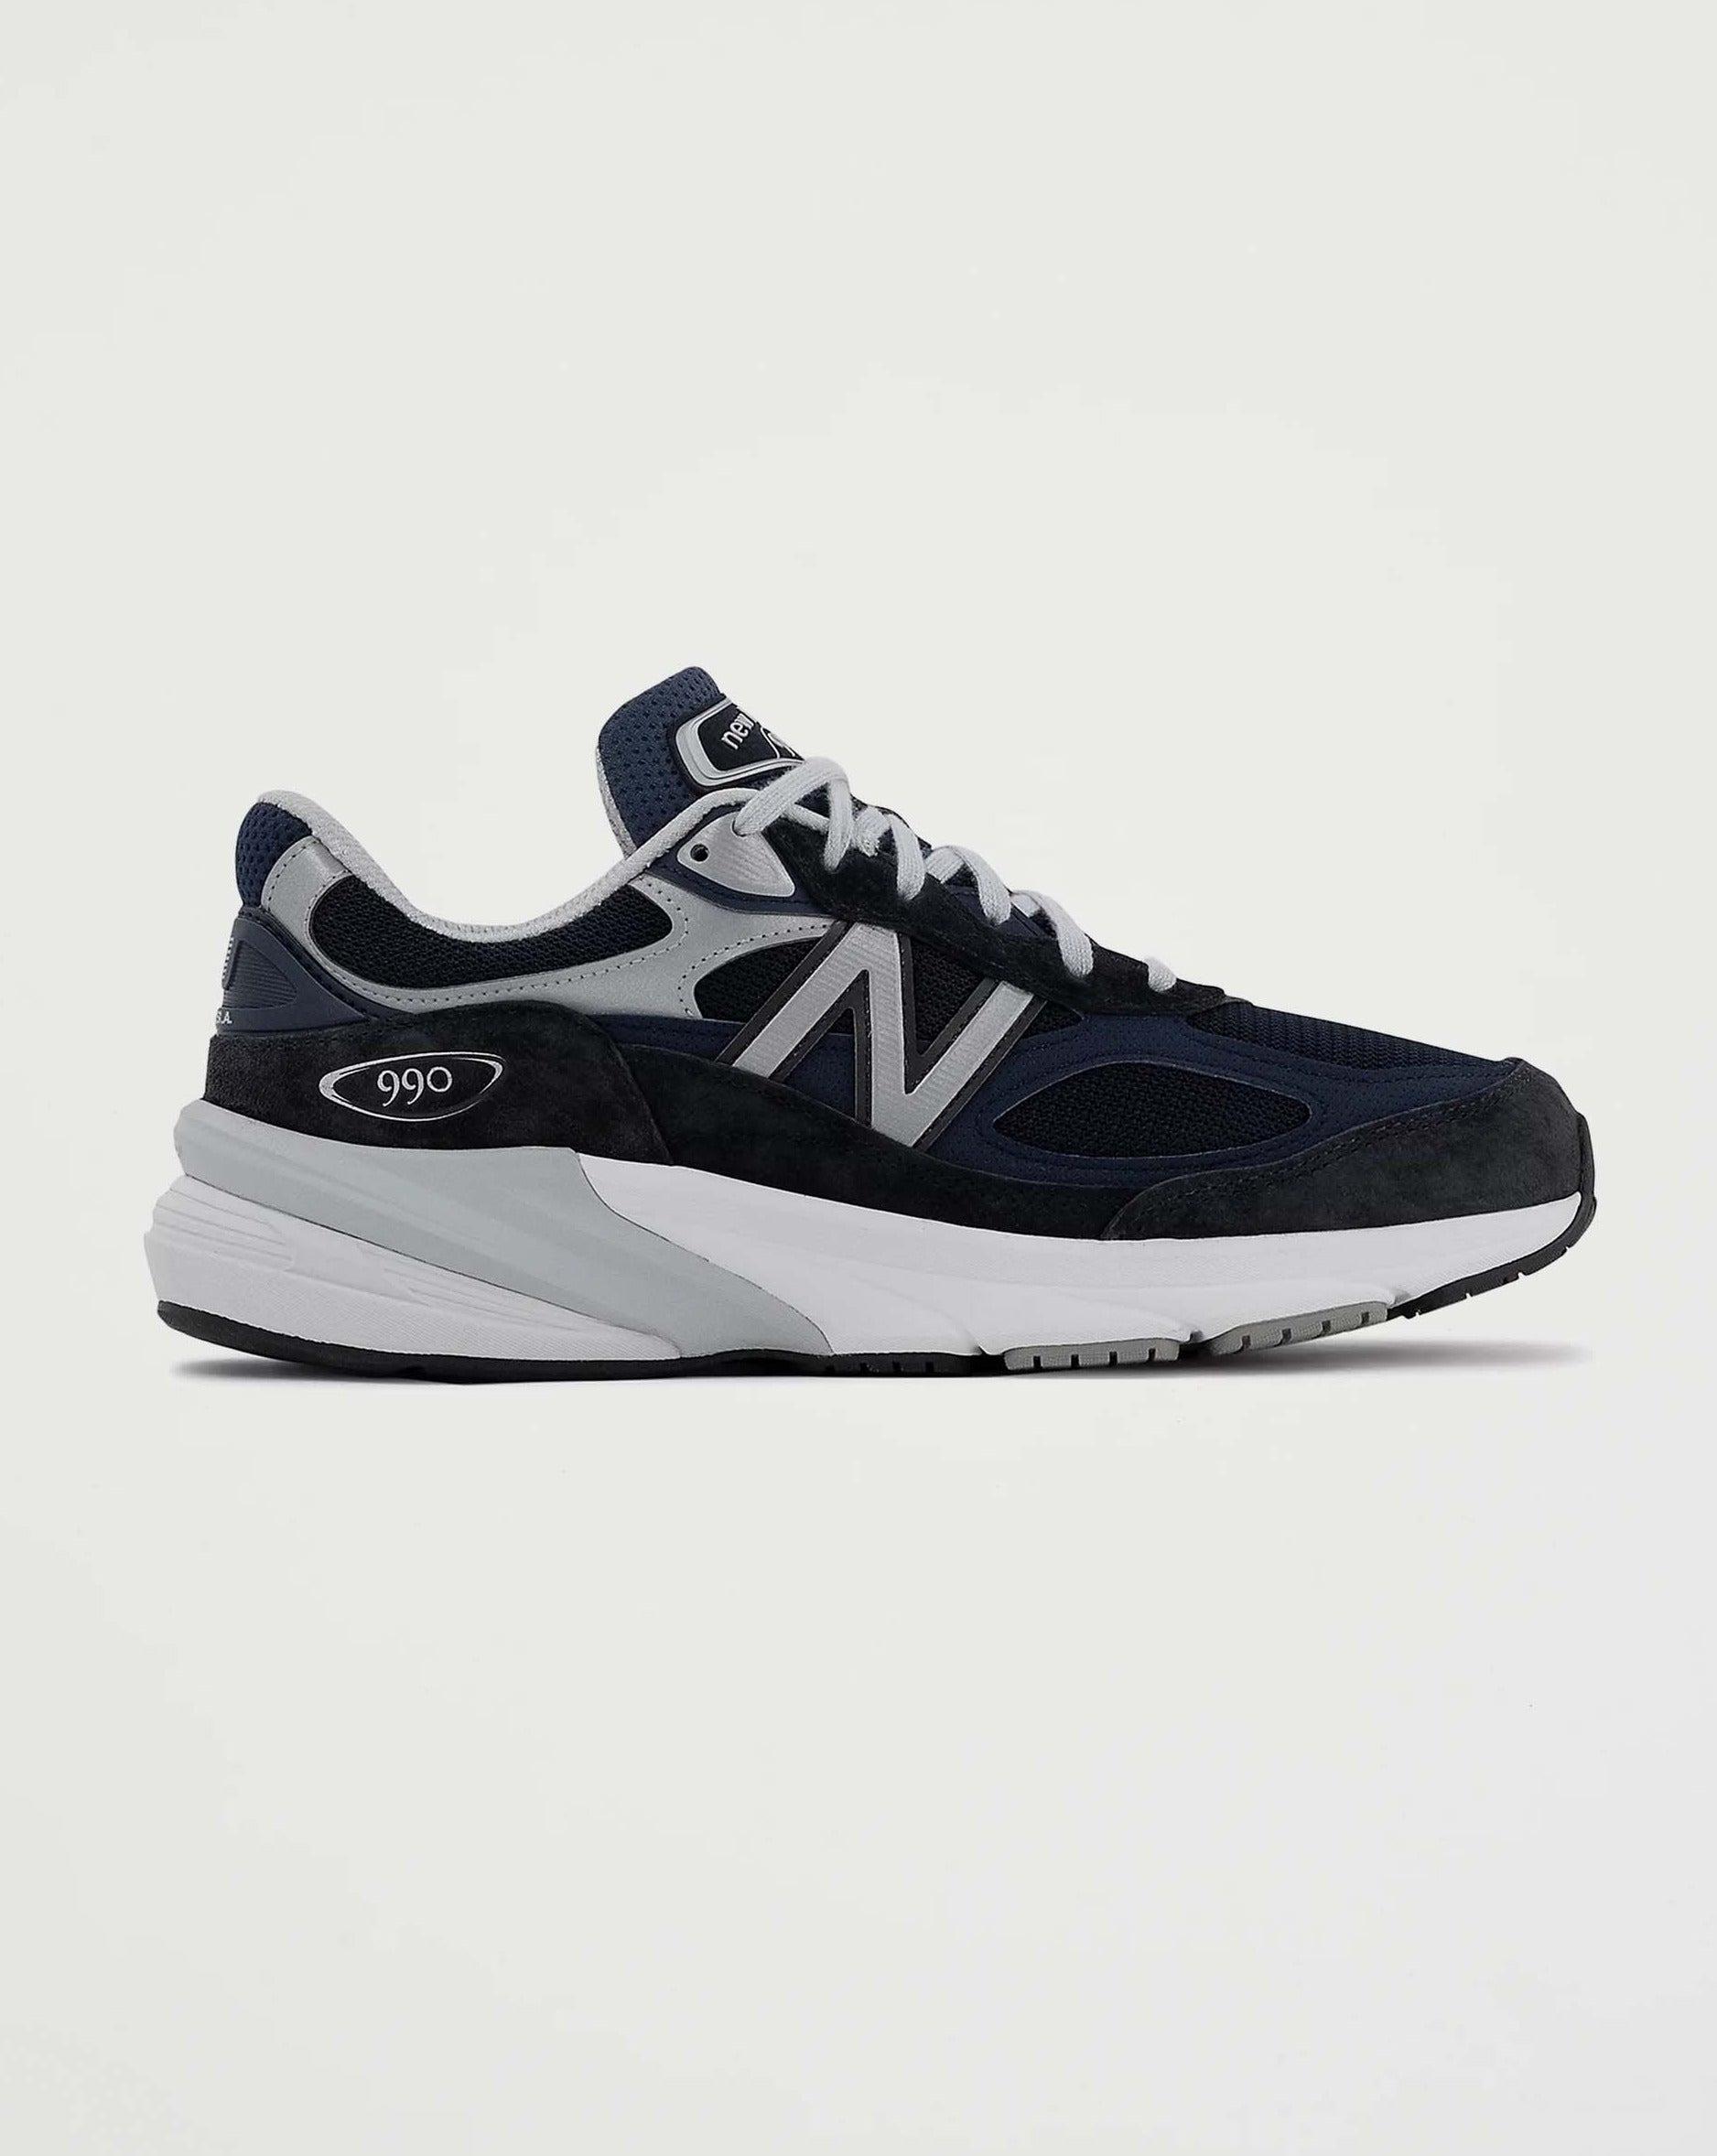 New Balance M's 990v6 'Made in USA' Navy Shoes Sneakers Men